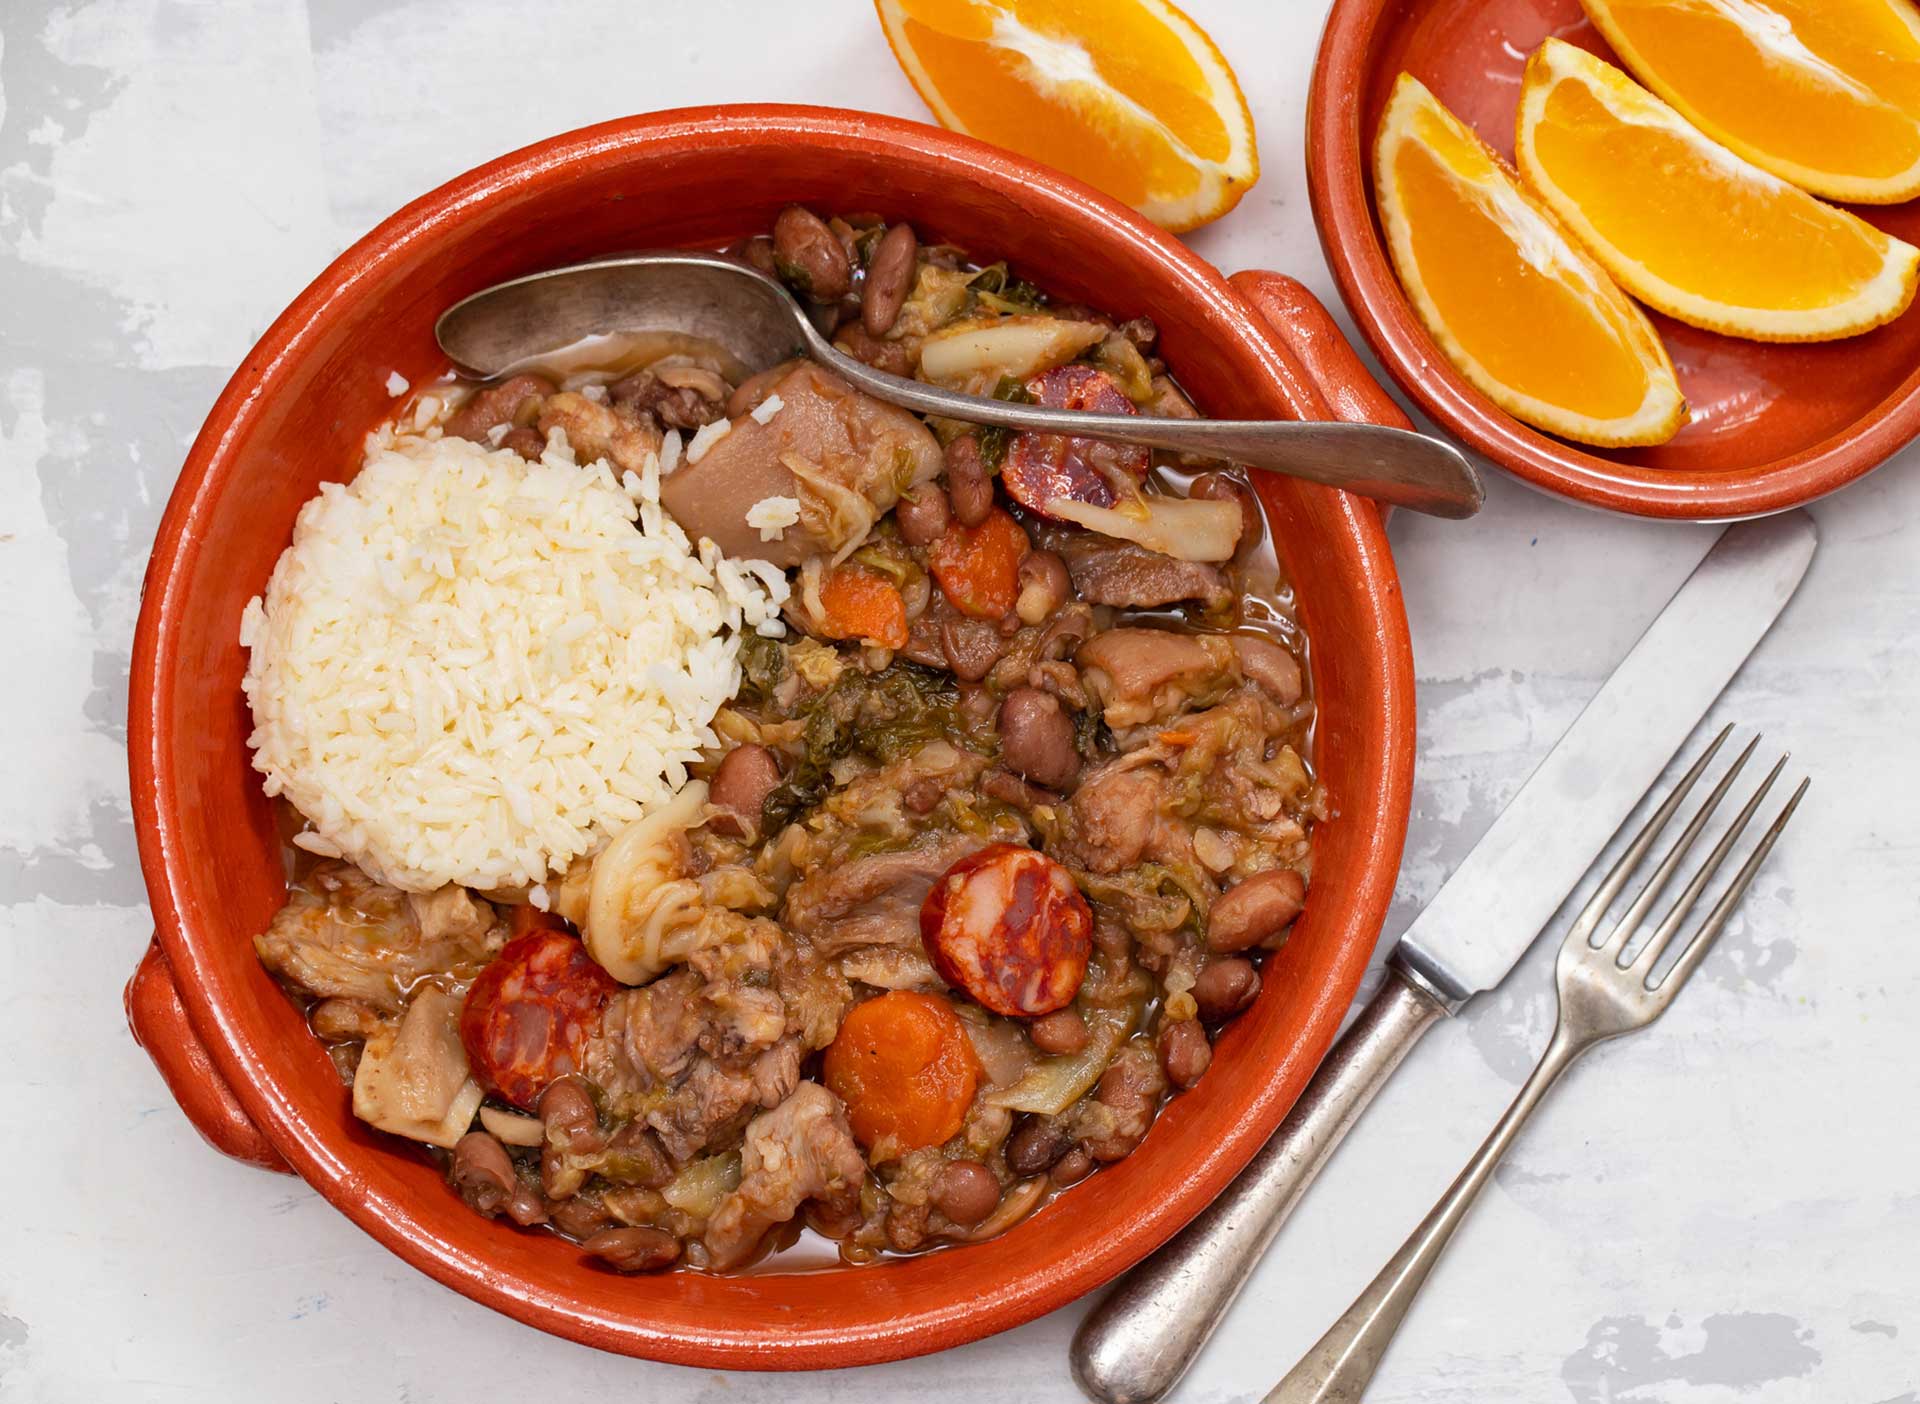 Feijoada, one of the traditional Portuguese dishes